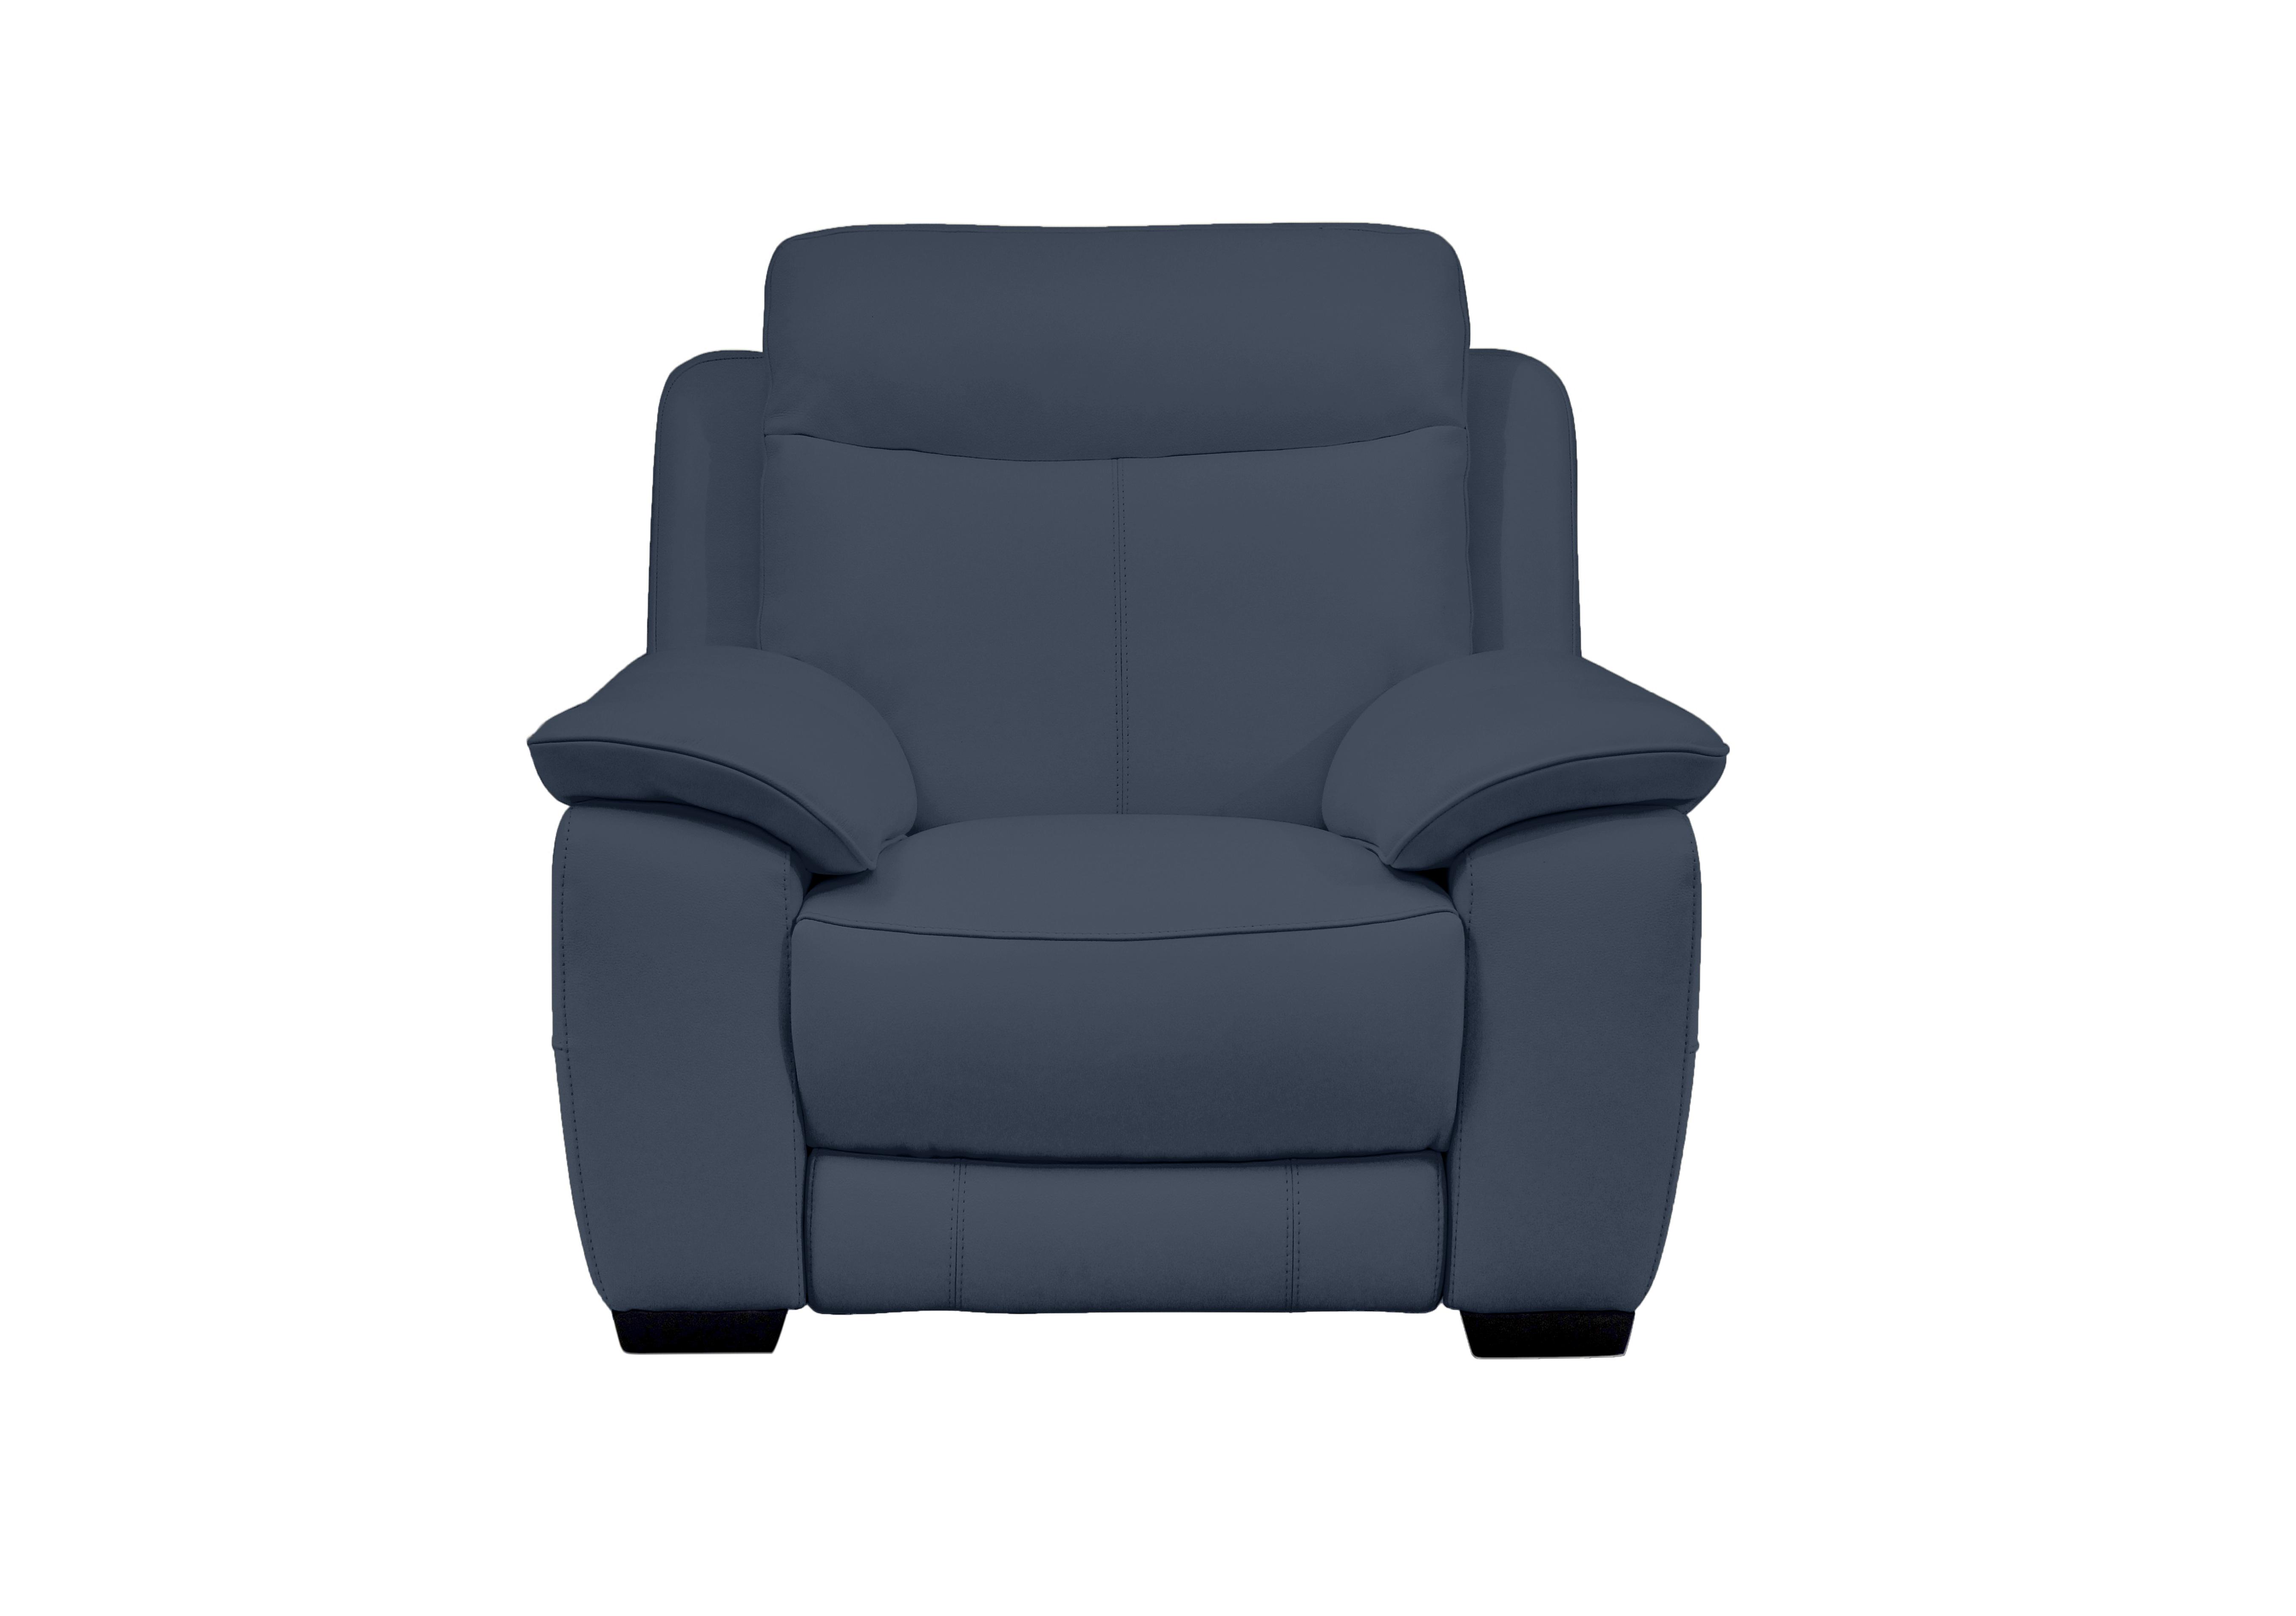 Starlight Express Leather Armchair in Bv-313e Ocean Blue on Furniture Village